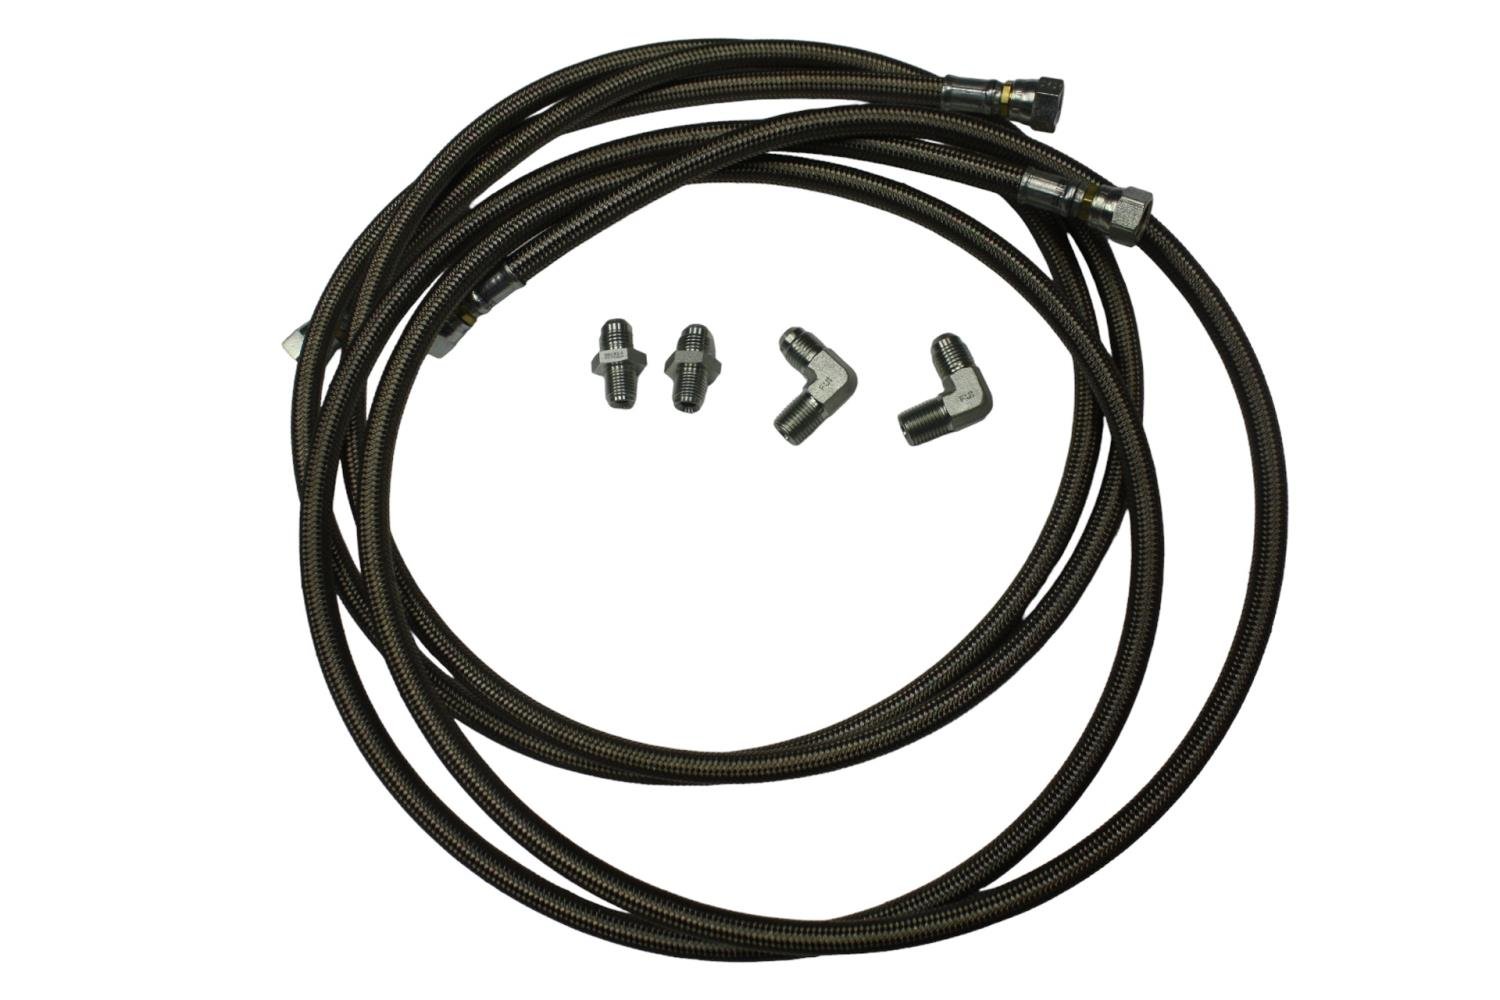 23-1500 RADAKOOL Automatic Transmission Cooler Lines for TH350, TH400, 700R Transmissions [7 ft.]